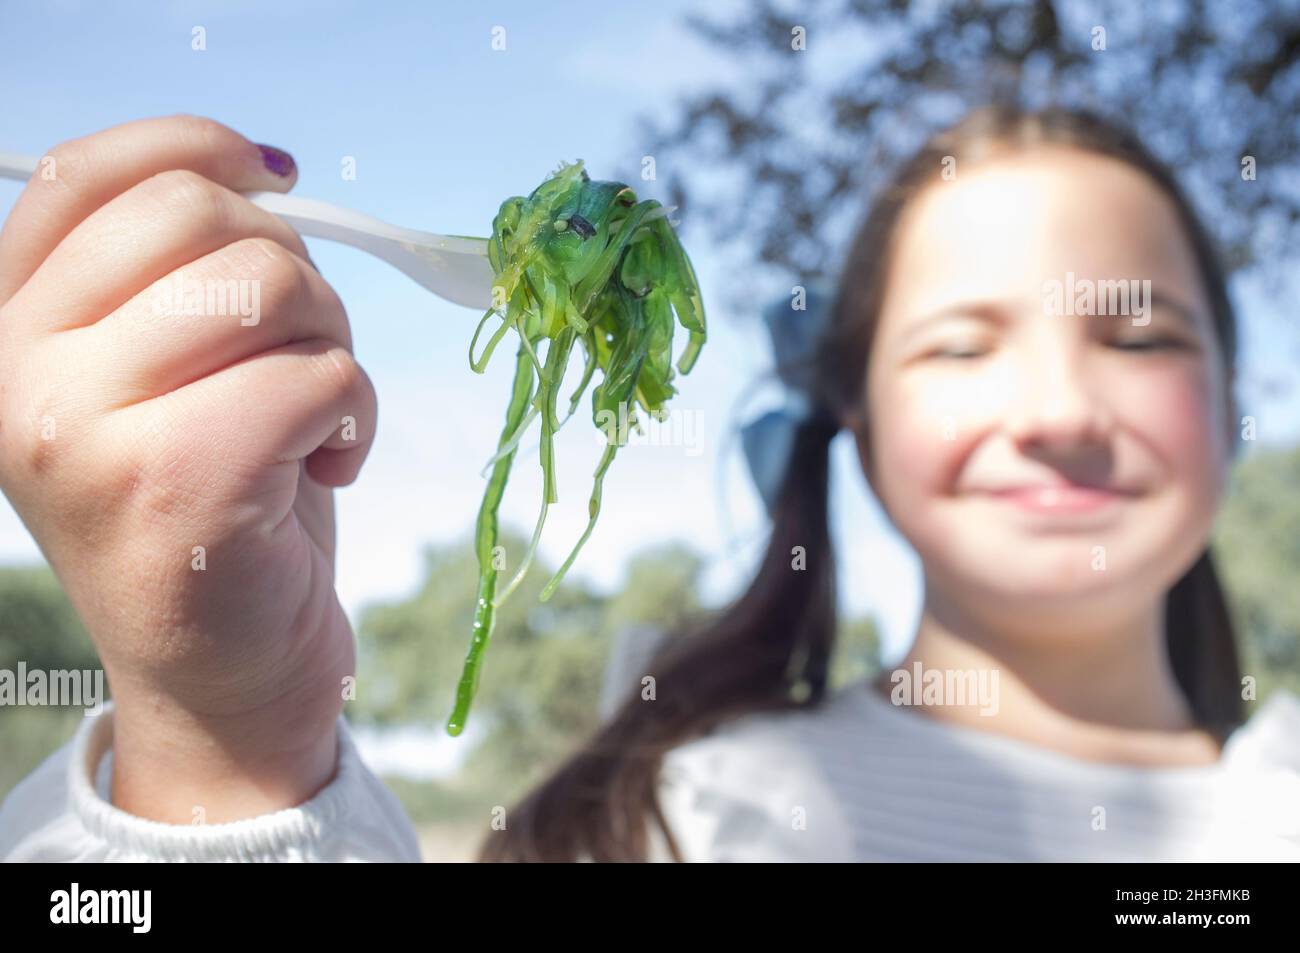 Child girl with wakame salad on fork. Outdoors background Stock Photo